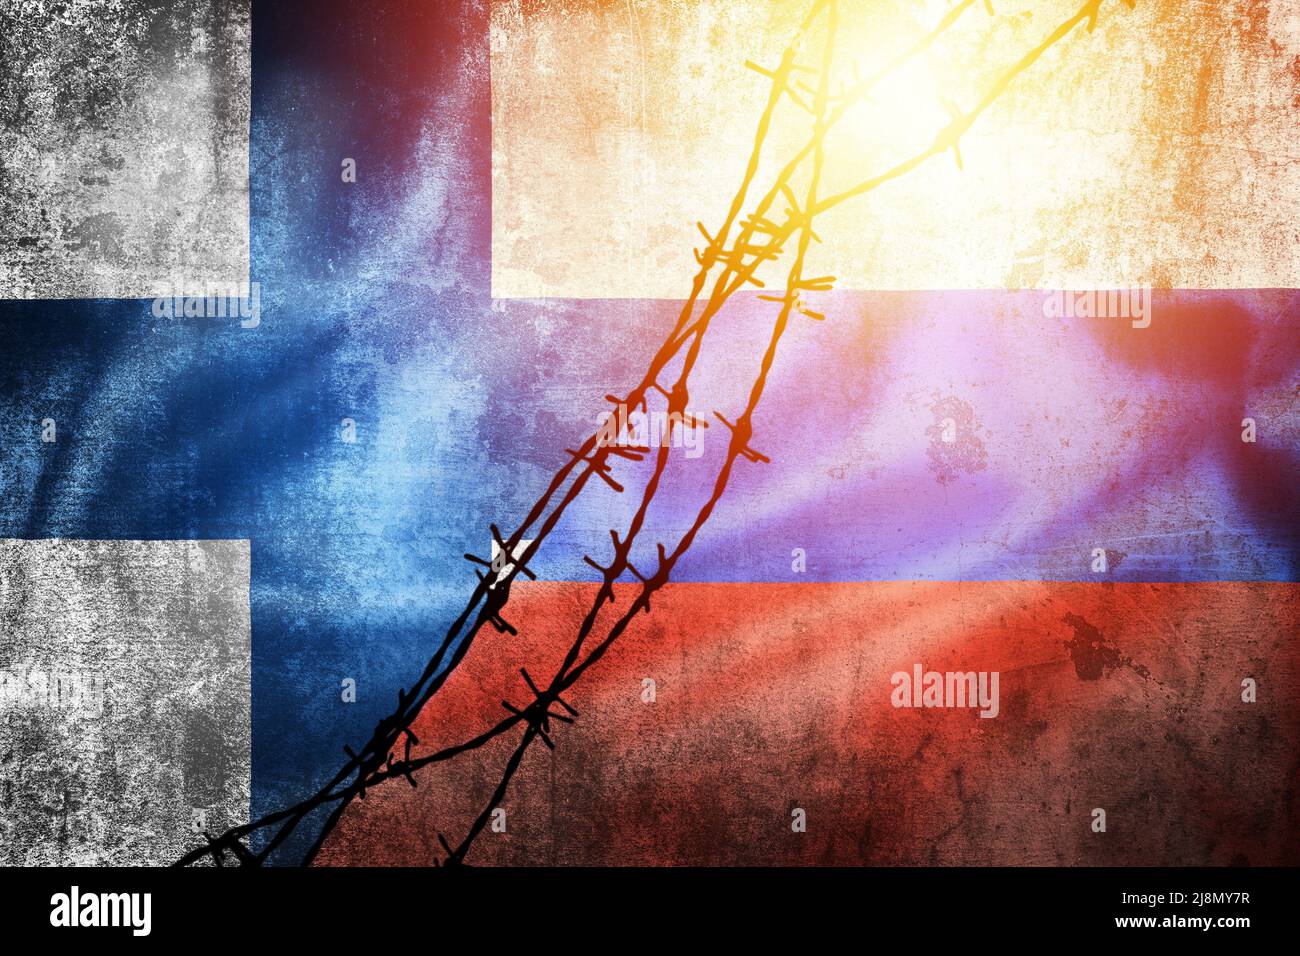 Grunge flags of Russian Federation and Finland divided by barb wire sun haze illustration, concept of tense relations between west and Russia Stock Photo